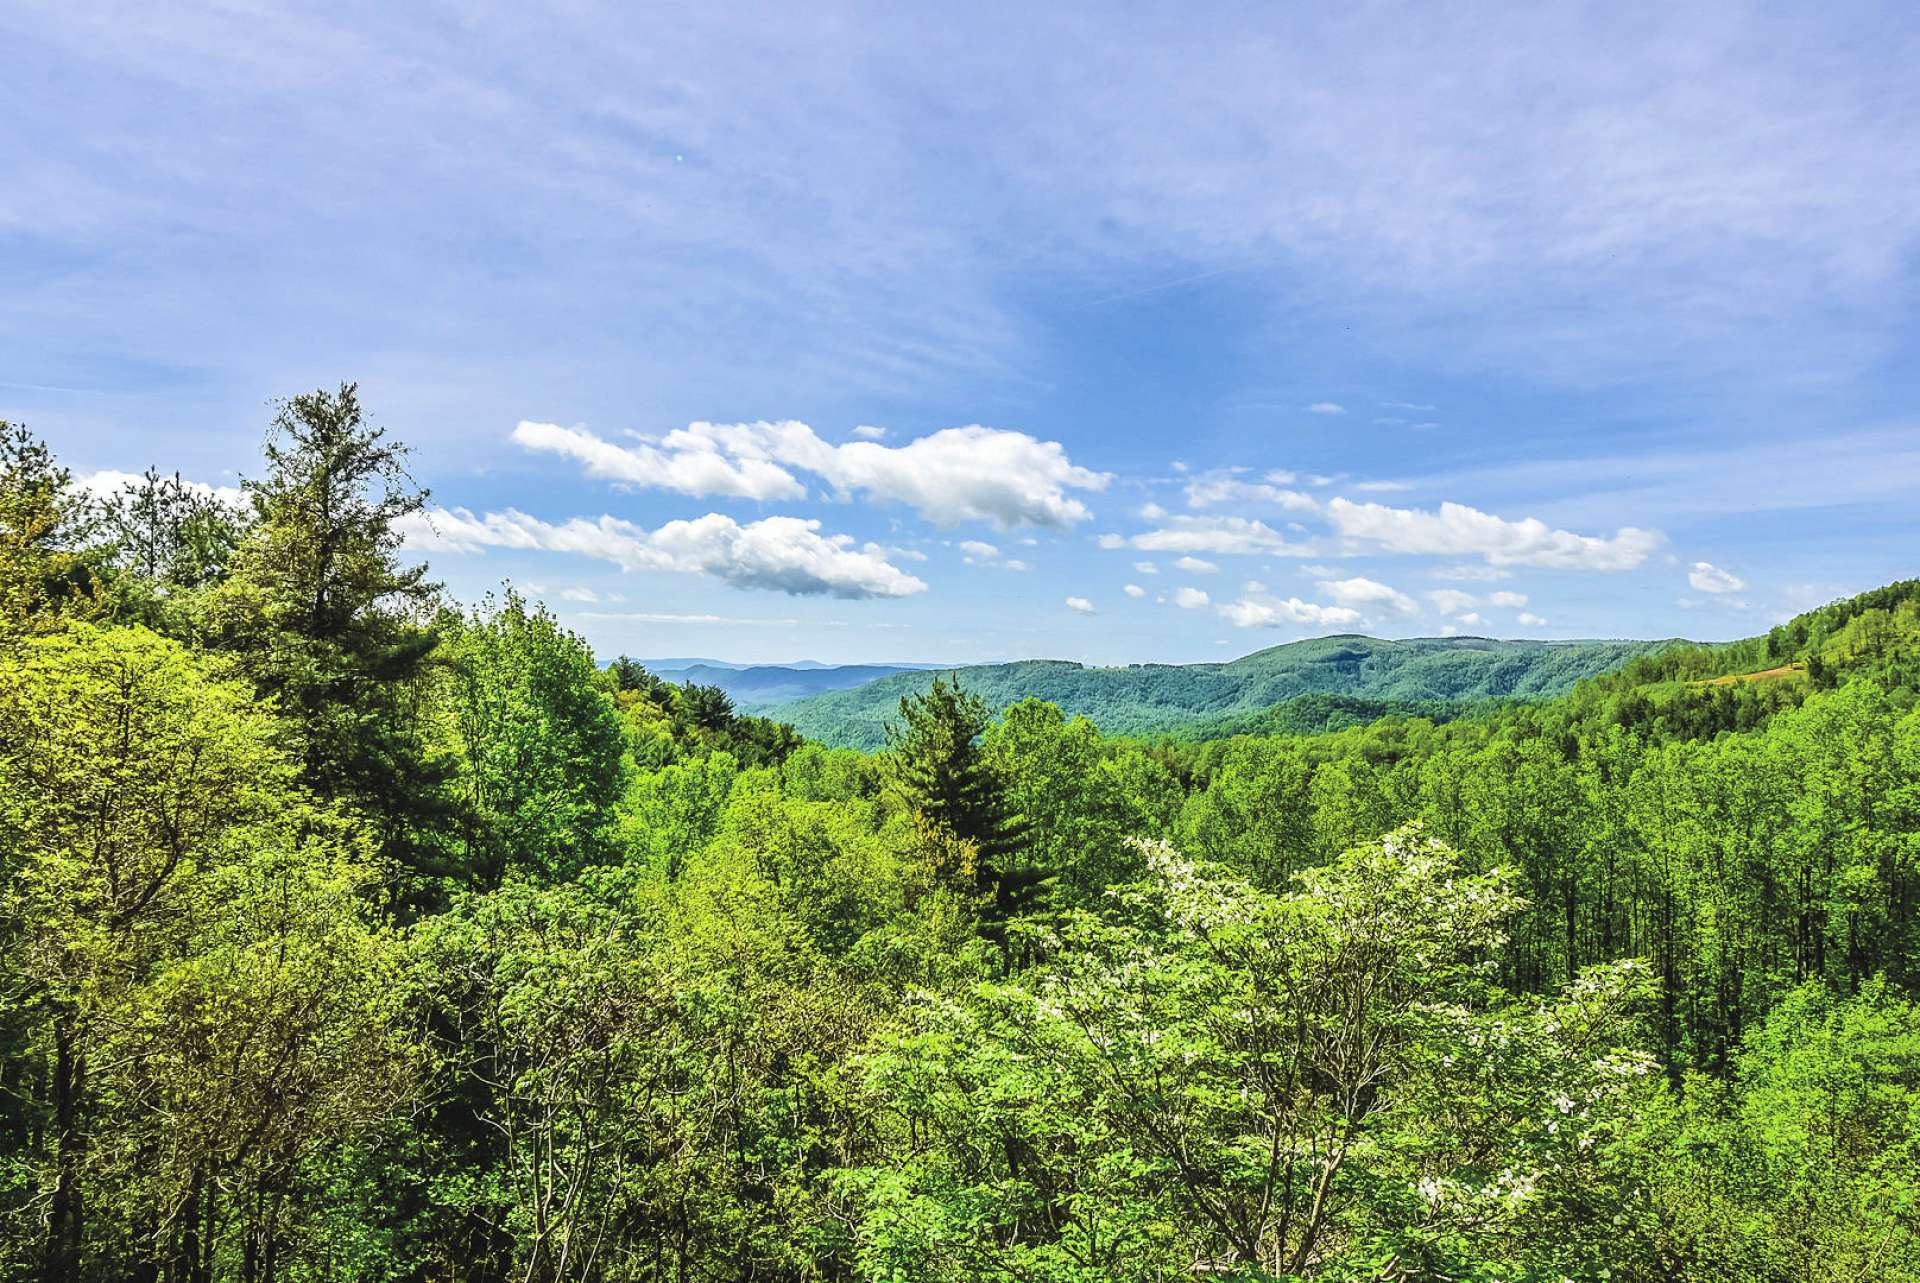 Enjoy long range layered mountain views from the back deck and many locations inside the home